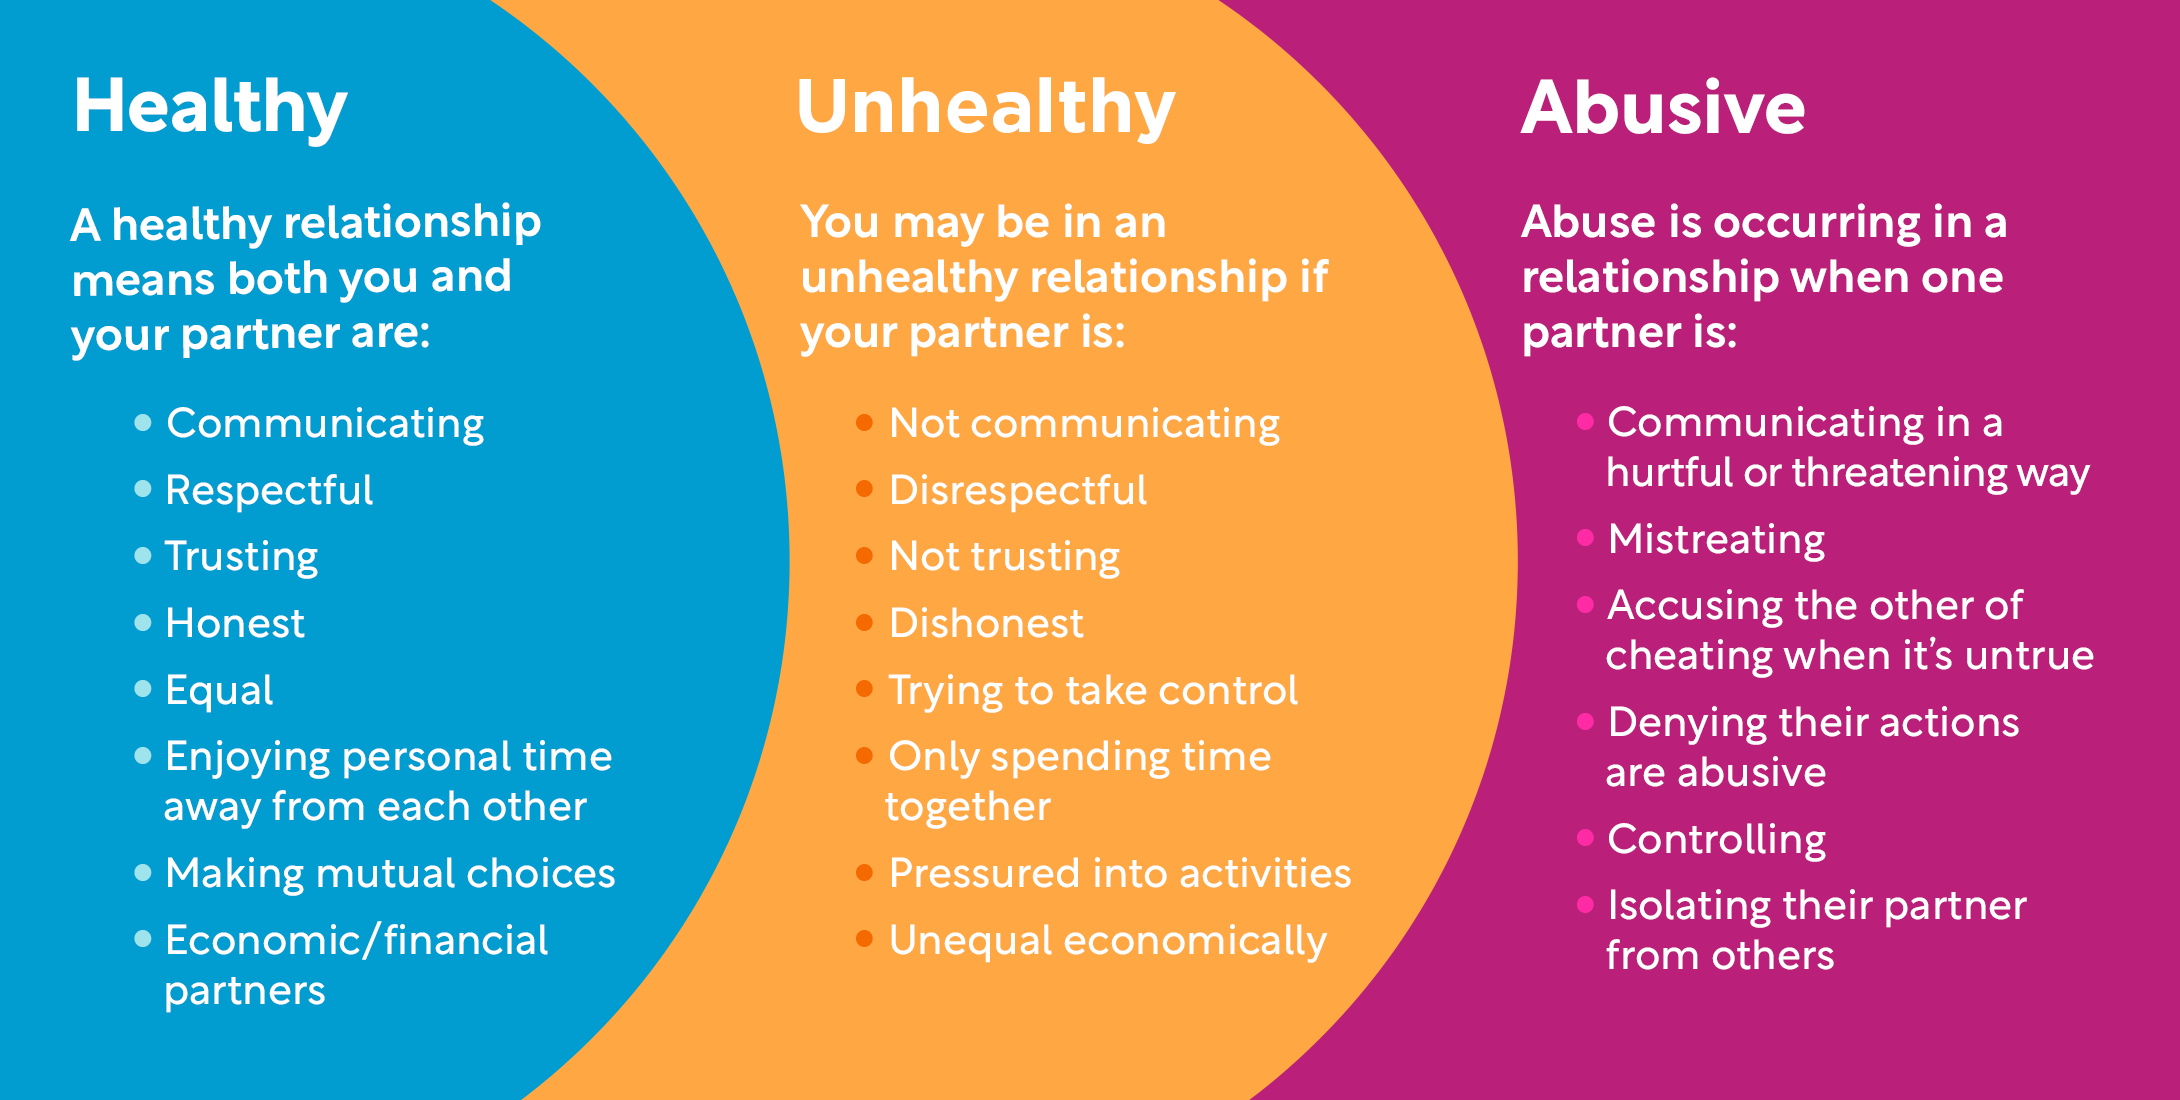 A three color graphic shows what the relationship spectrum looks like & explains the differences between healthy, unhealthy, and abusive relationships.